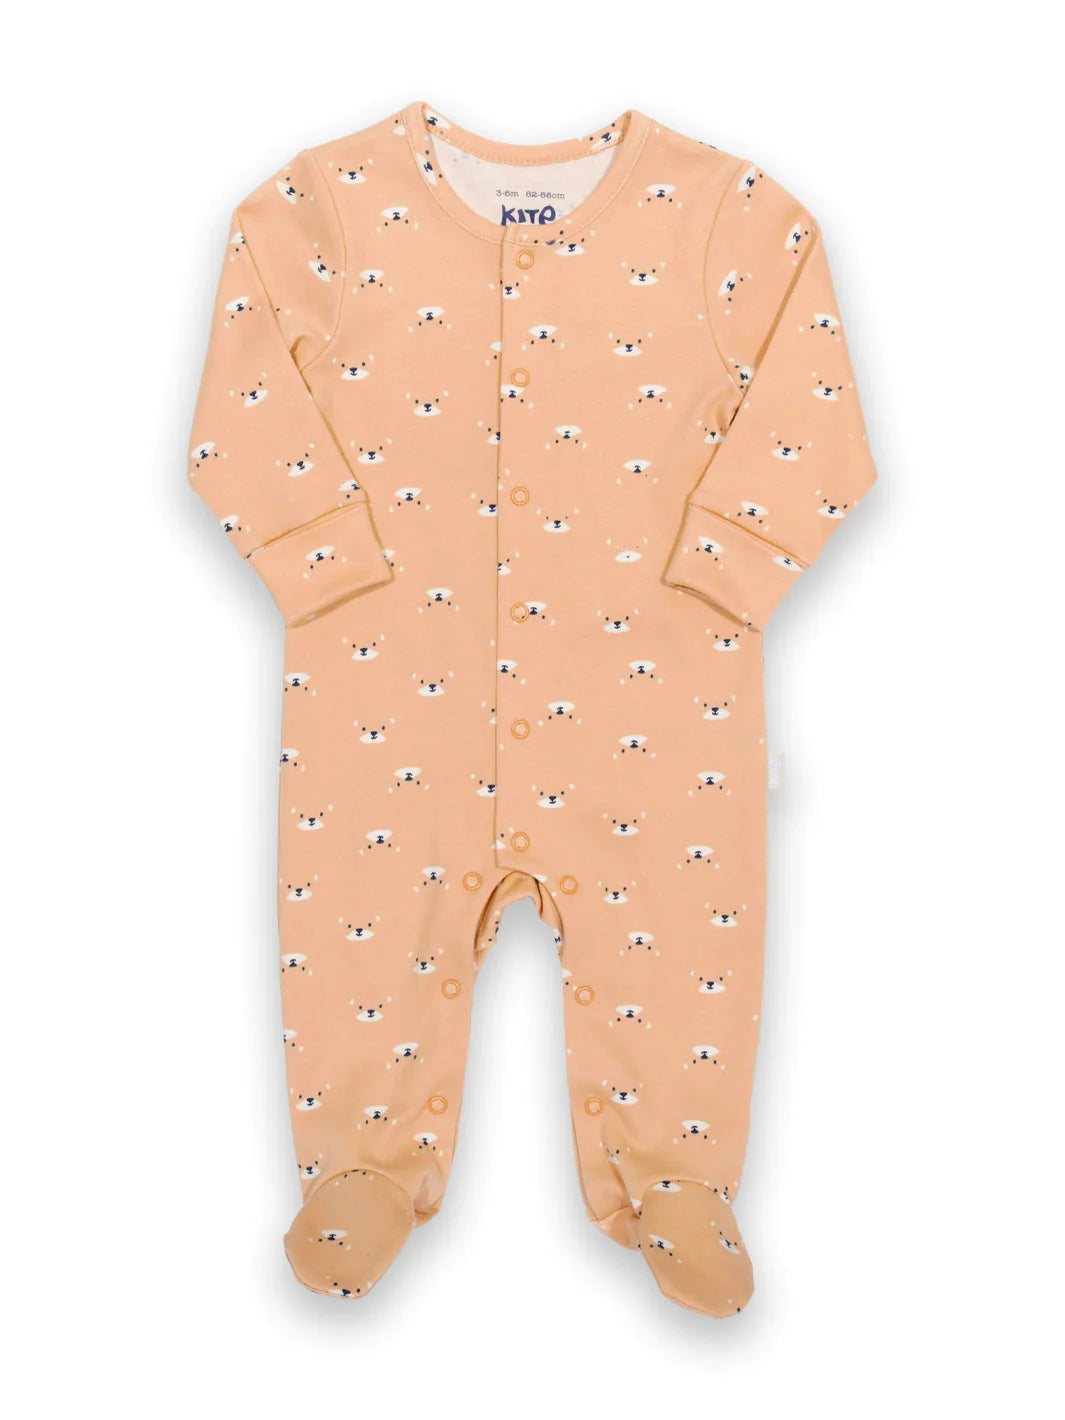 GOTS certified baby sleep suit in a mid orange colour with a repeated otter face print in dark blue and white. Poppers in all the usual places.